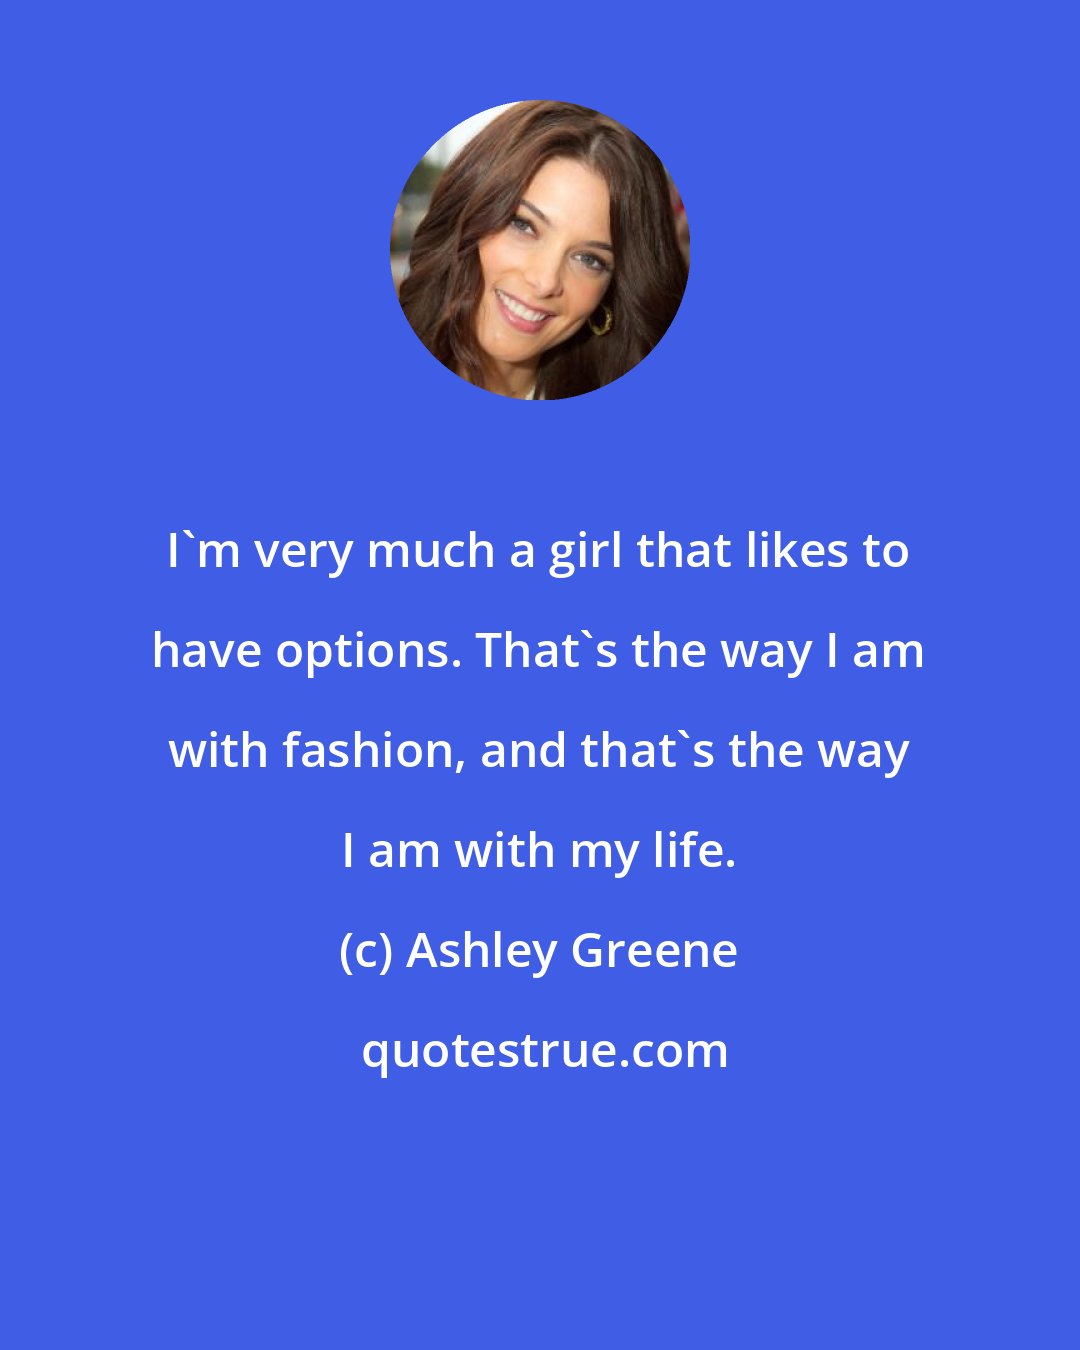 Ashley Greene: I'm very much a girl that likes to have options. That's the way I am with fashion, and that's the way I am with my life.